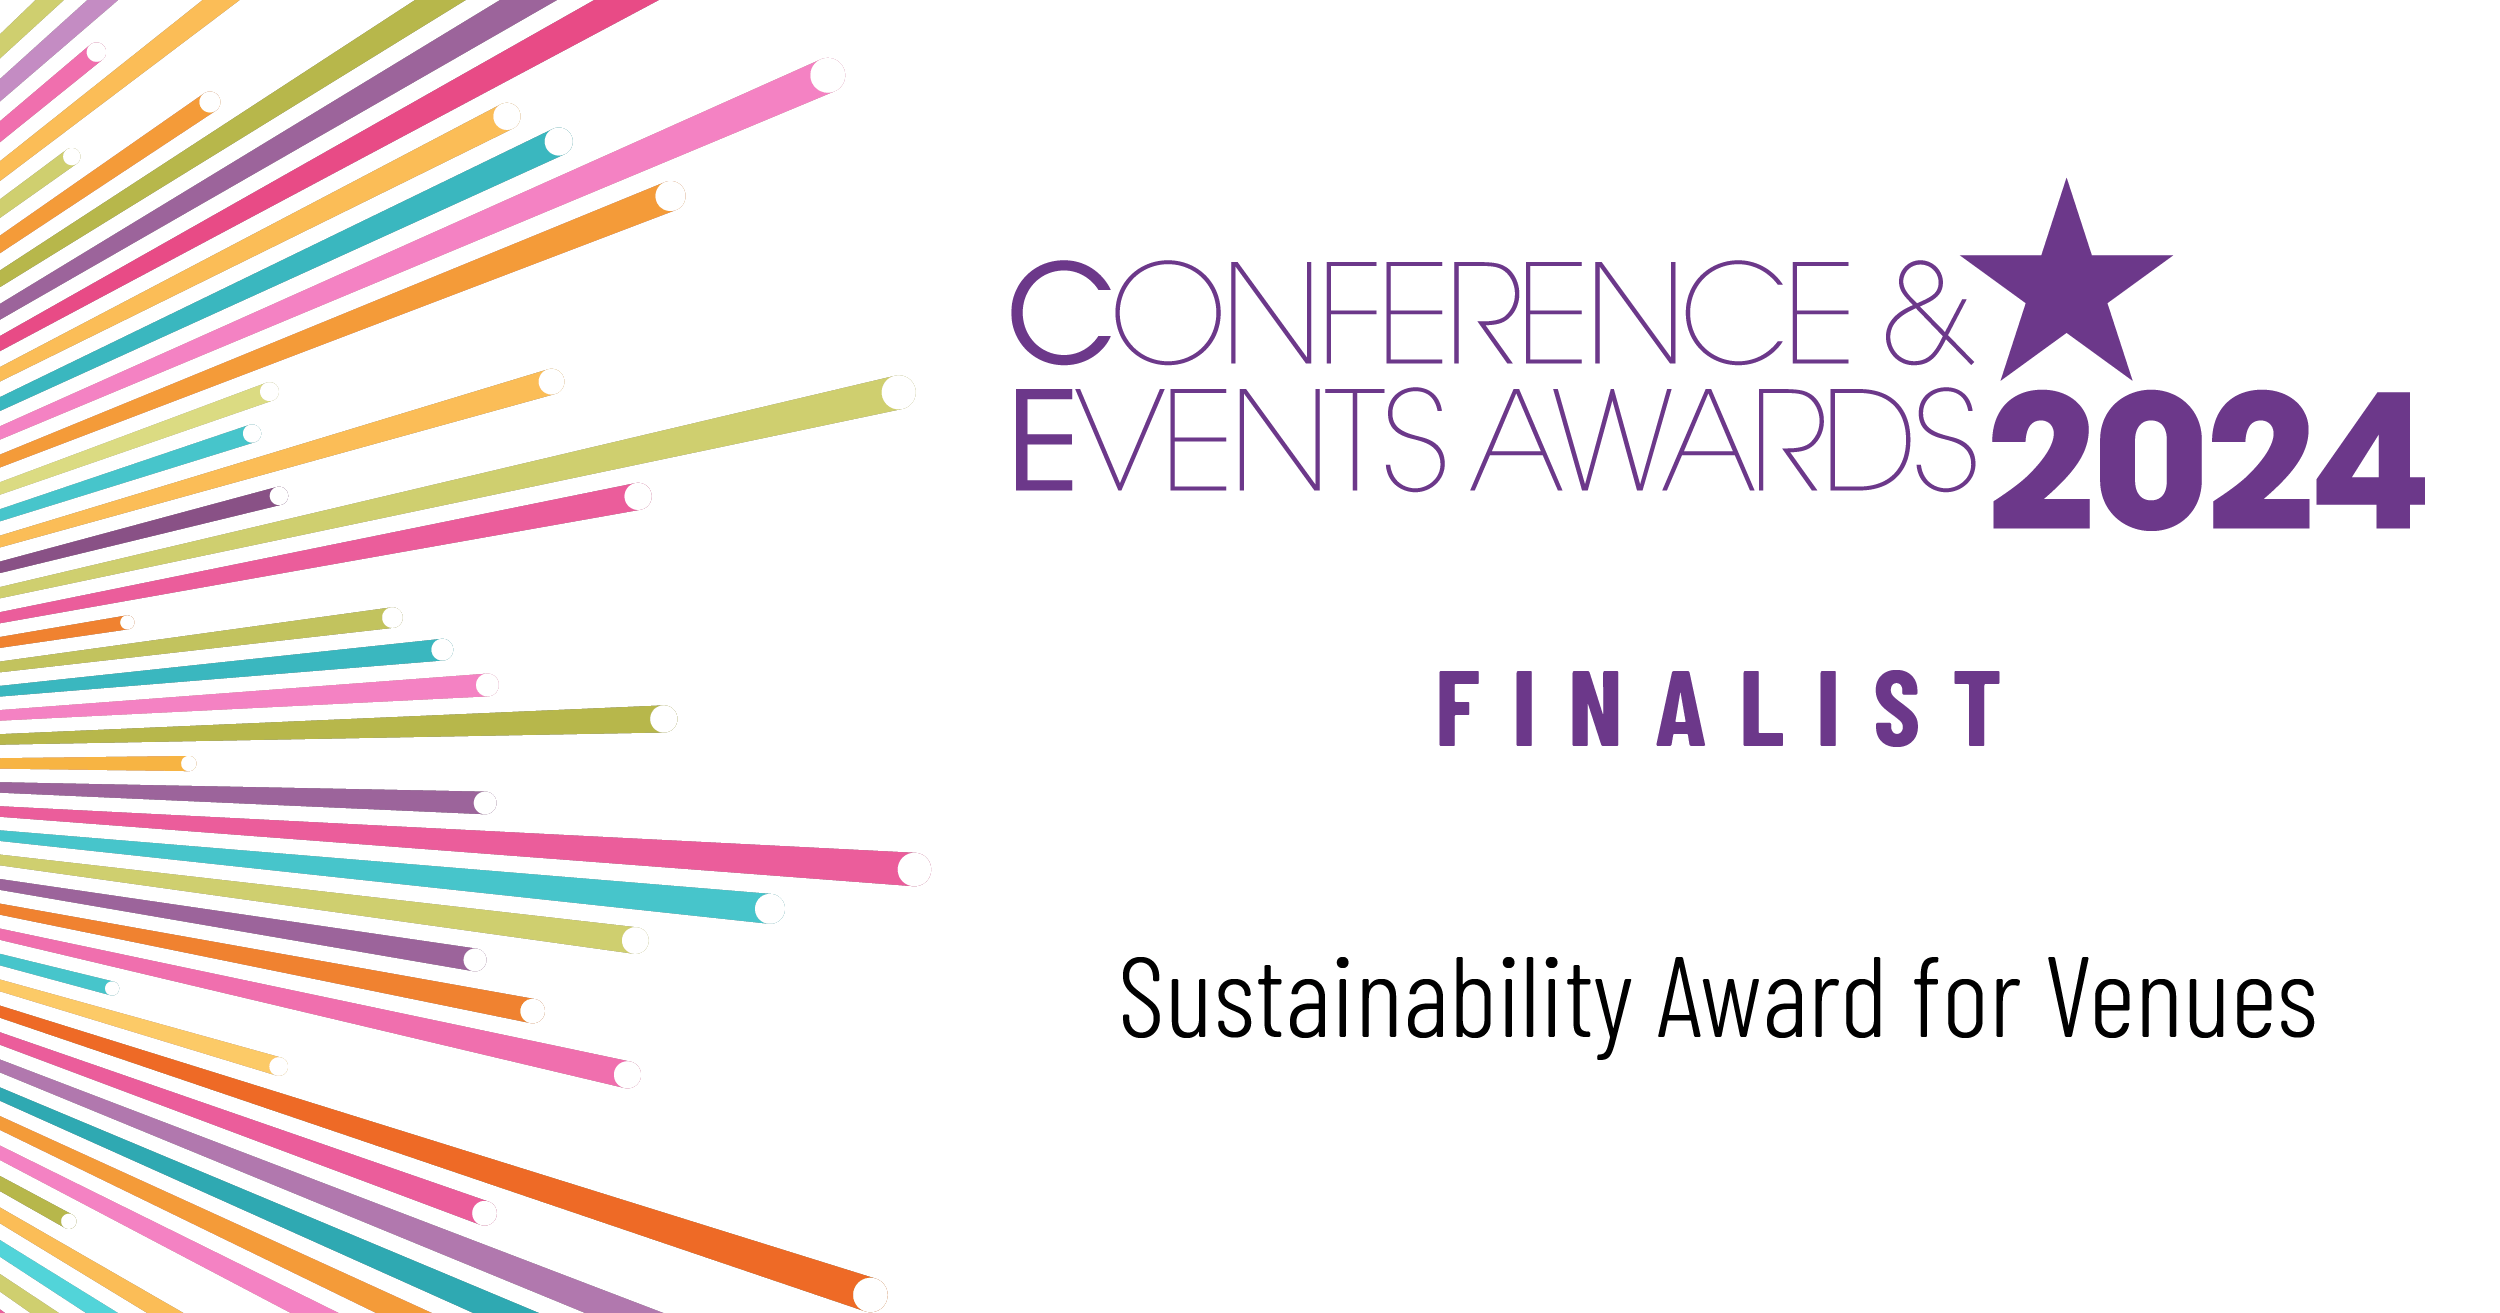 BMA House shortlisted as finalists at the Conference & Events Awards 2024!